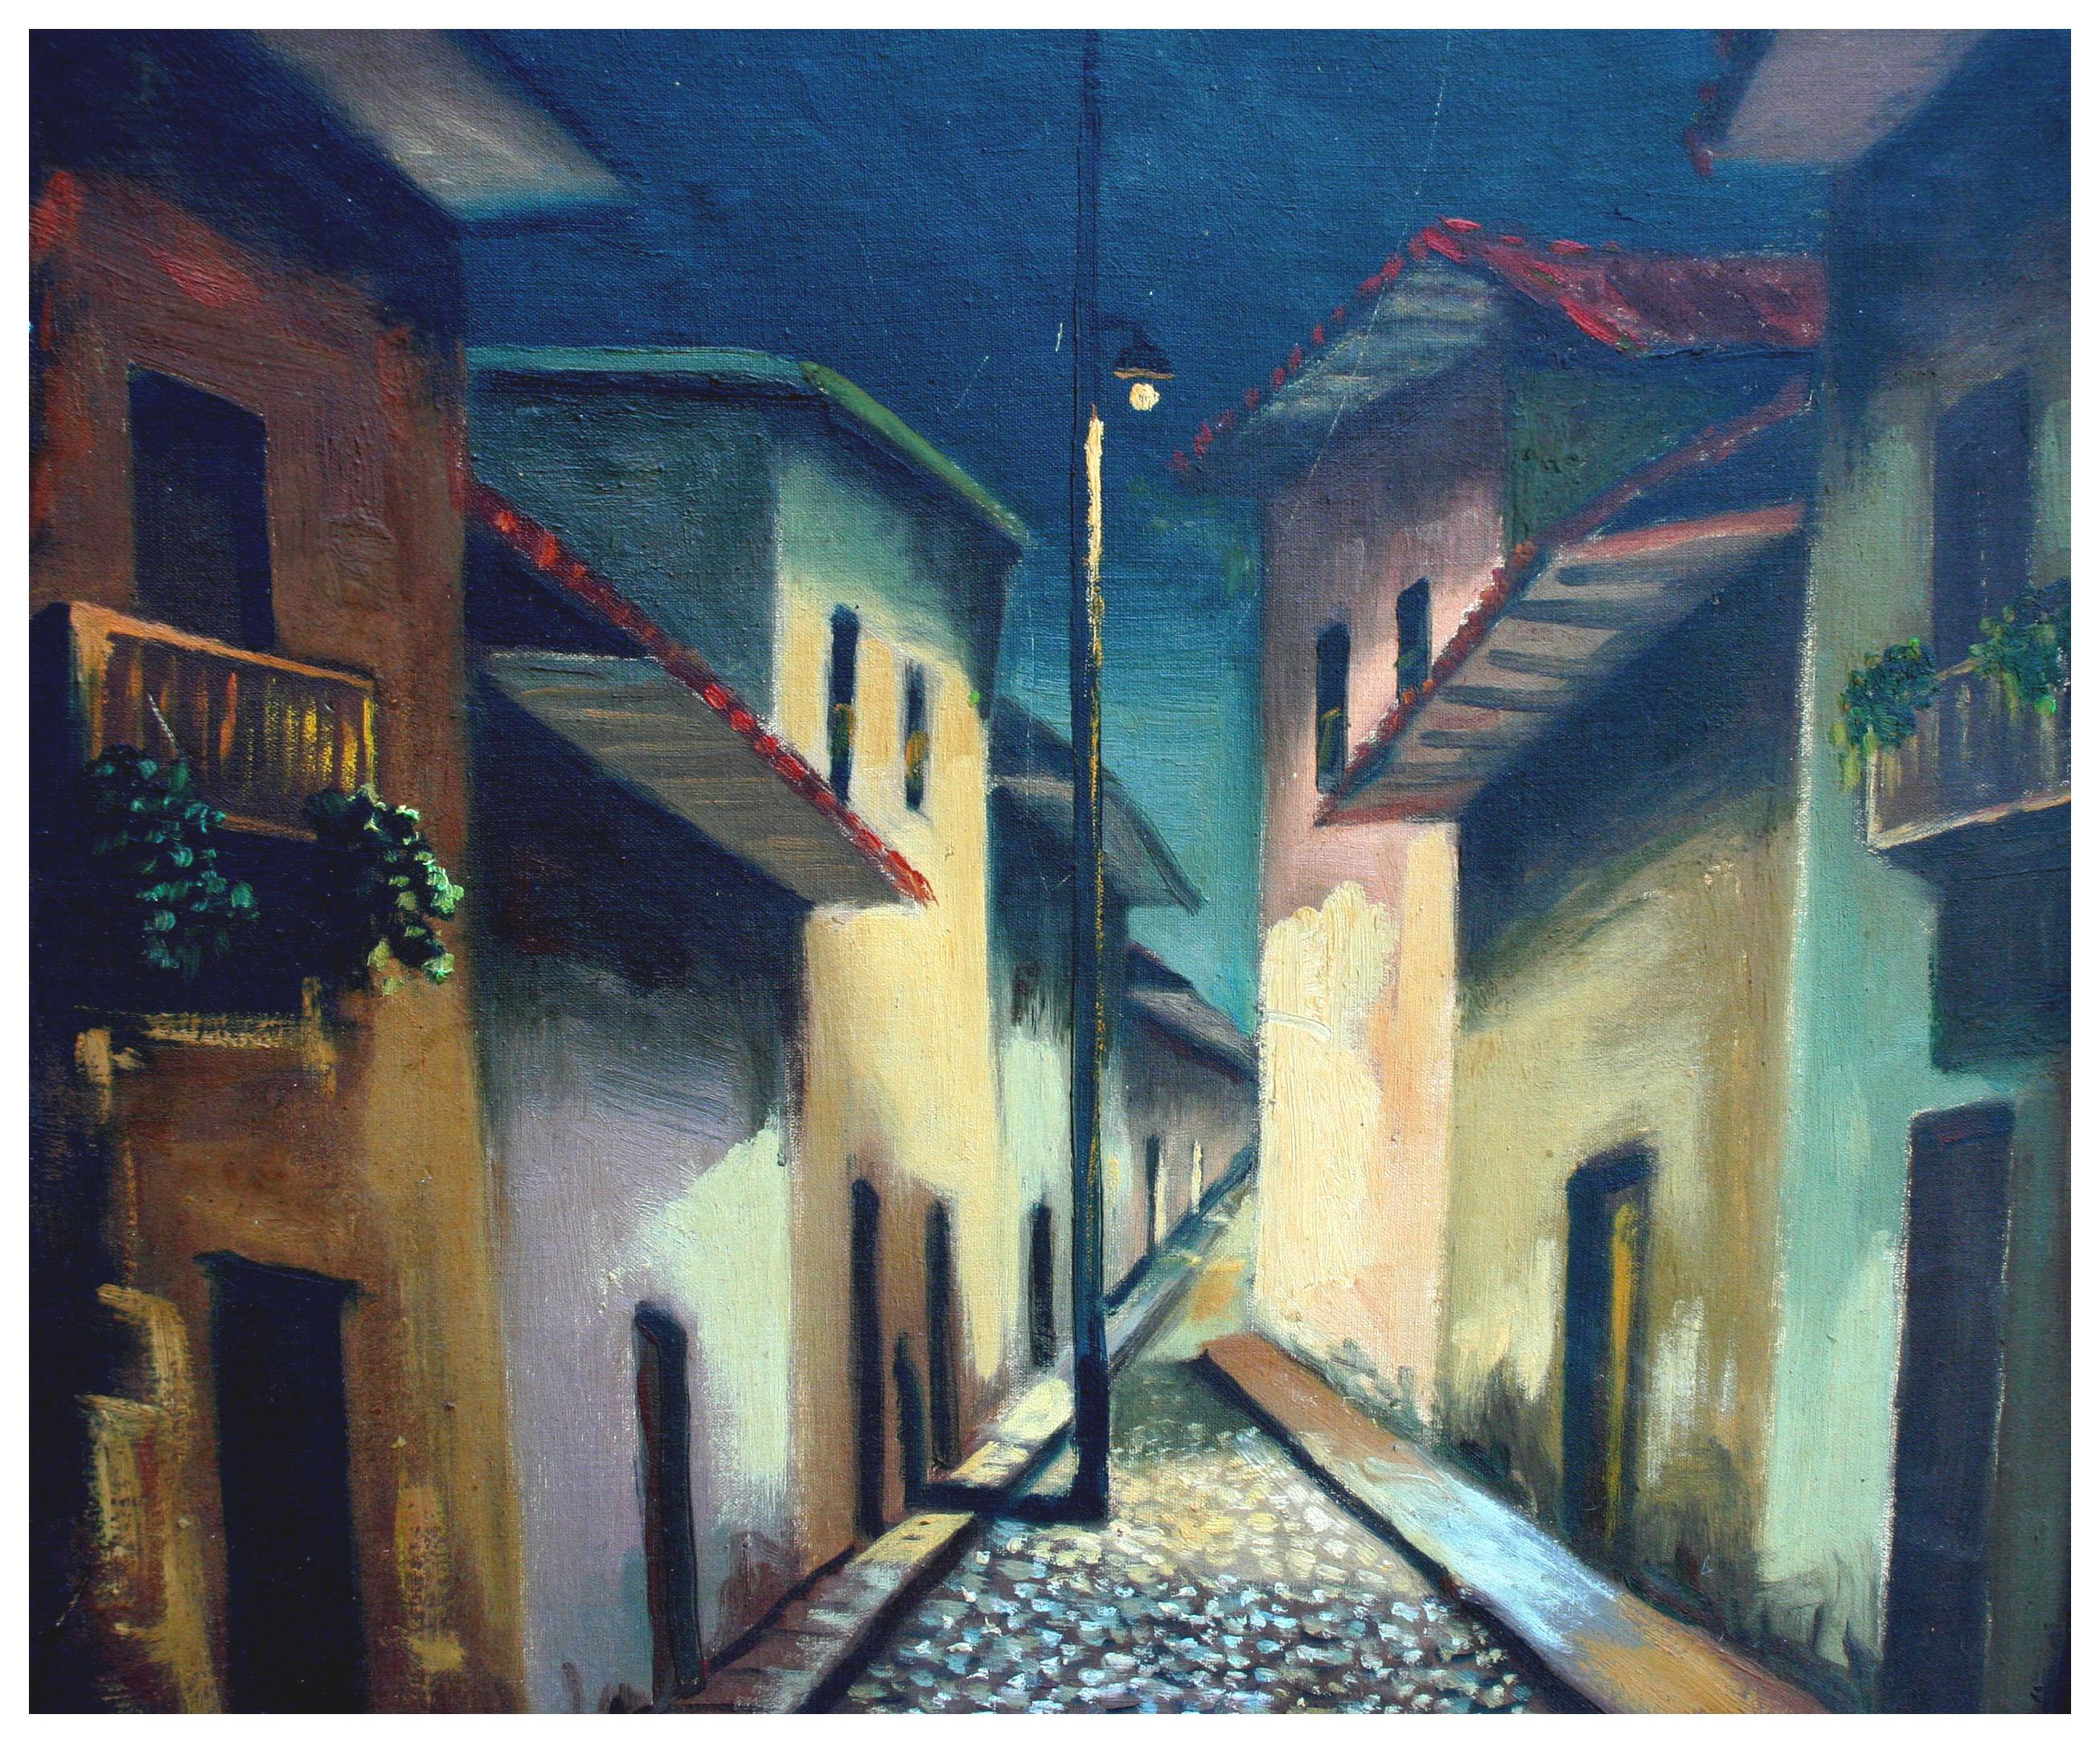 Nocturnal Spanish Town landscape - Painting by S. Gomez